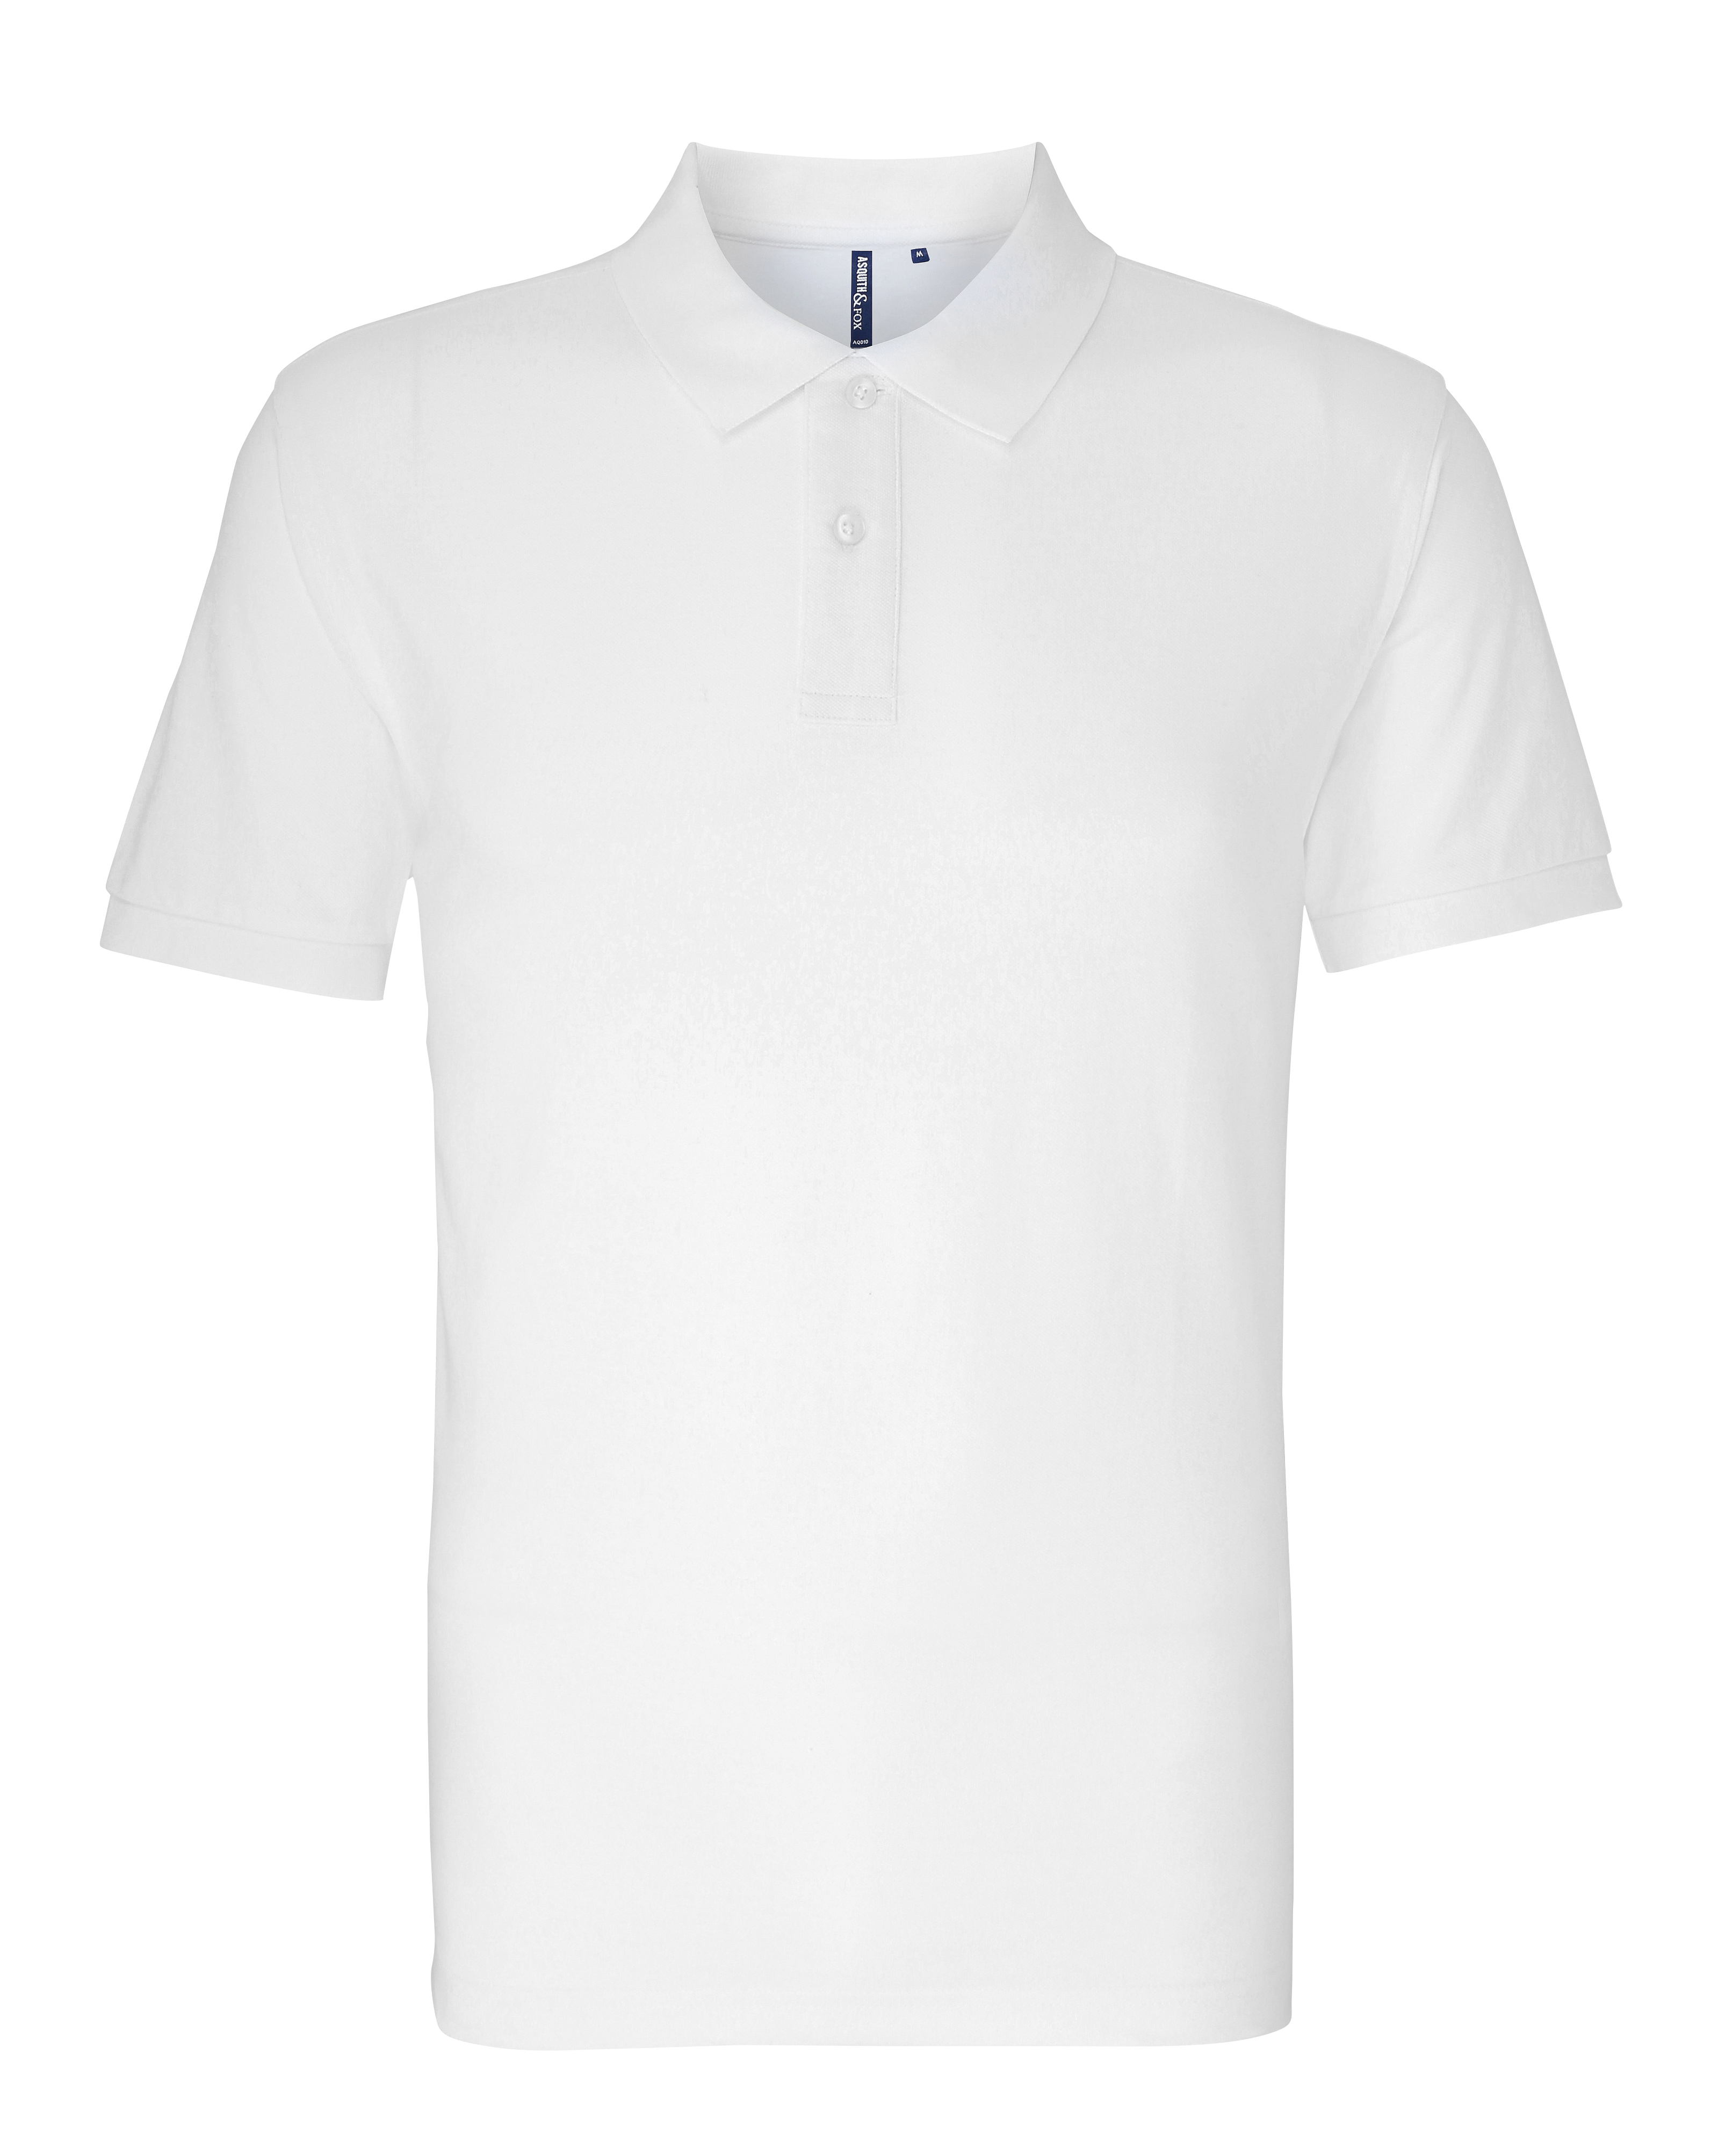 ax-httpswebsystems.s3.amazonaws.comtmp_for_downloadasquith-and-fox-men27s-polo-white.jpg